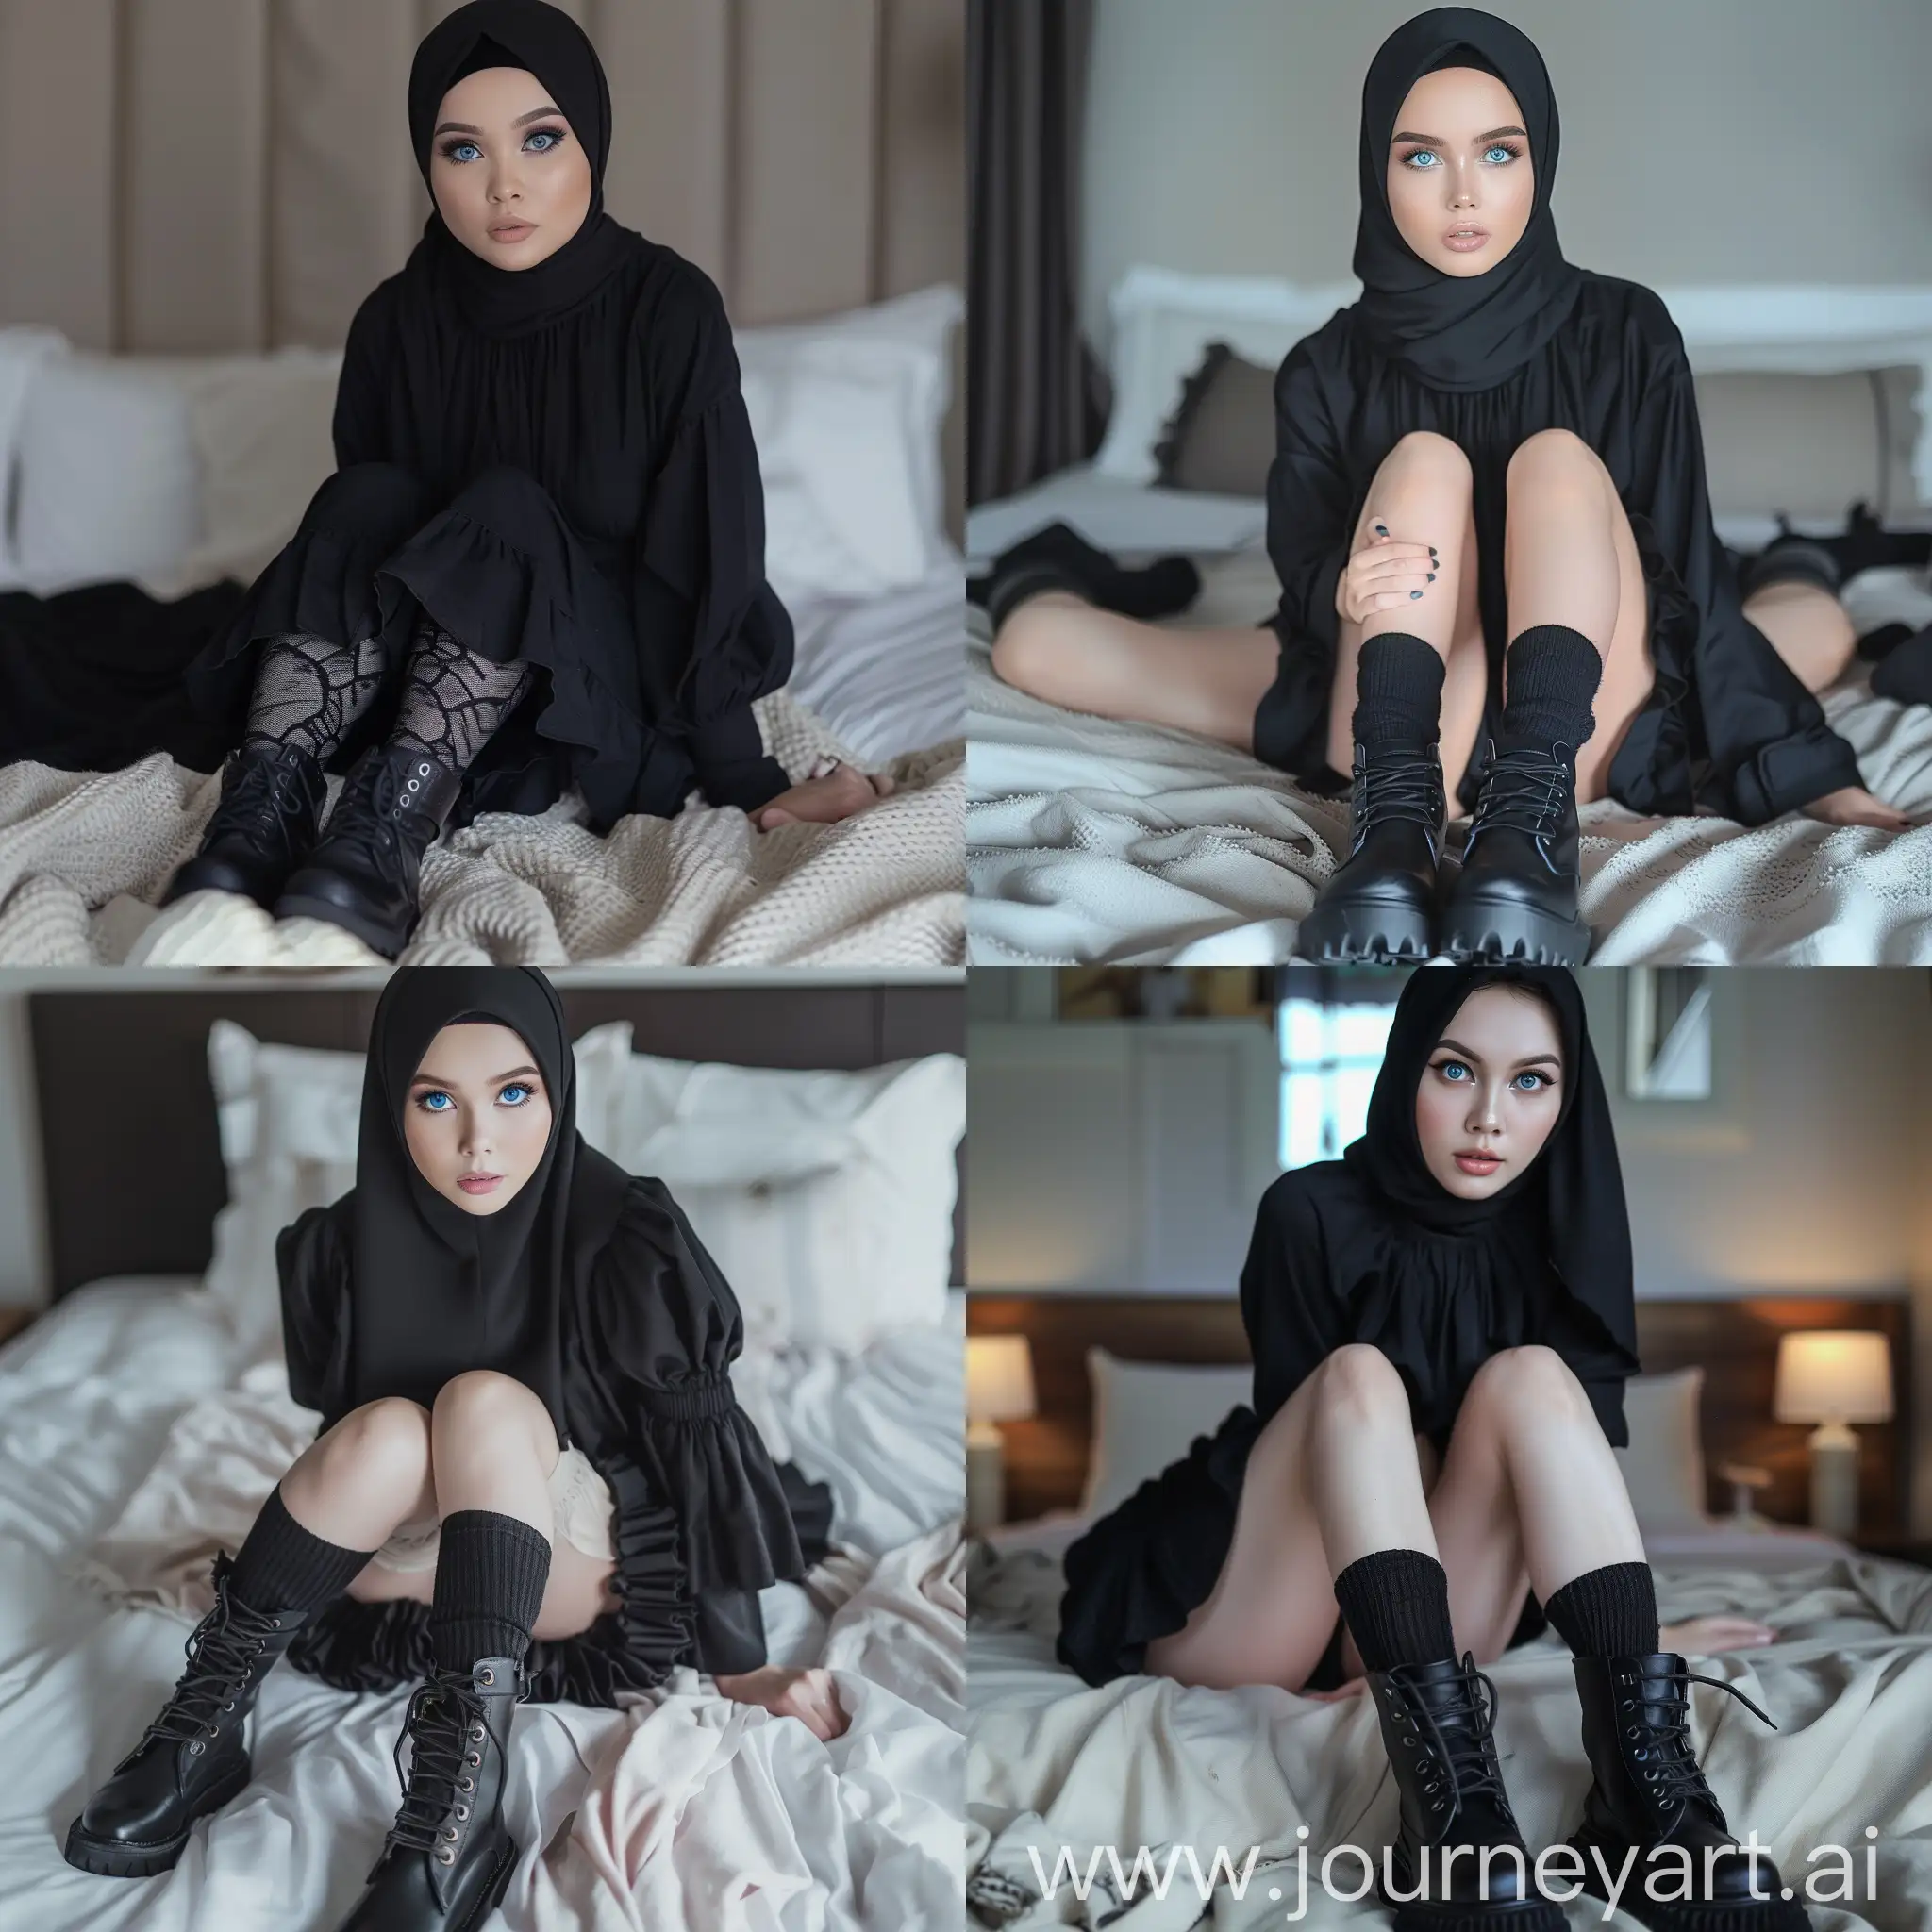 Indonesian-Hijabi-Influencer-in-Black-Dress-Beauty-Portrait-with-Blue-Eyes